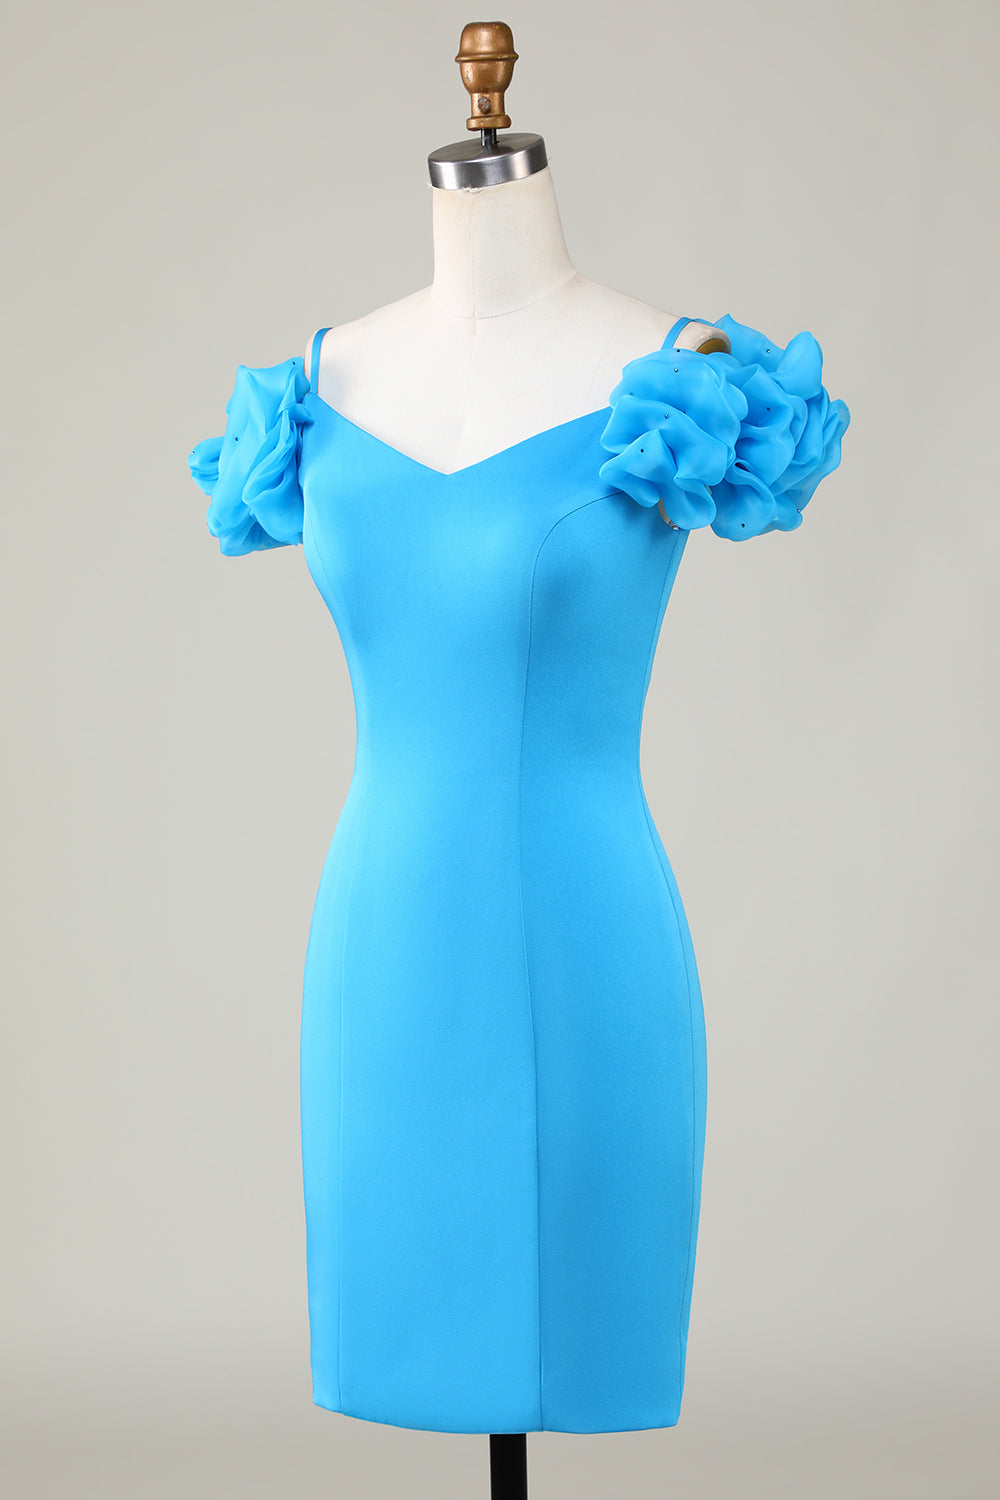 Bodycon Off the Shoulder Blue Short Homecoming Dress with Ruffles